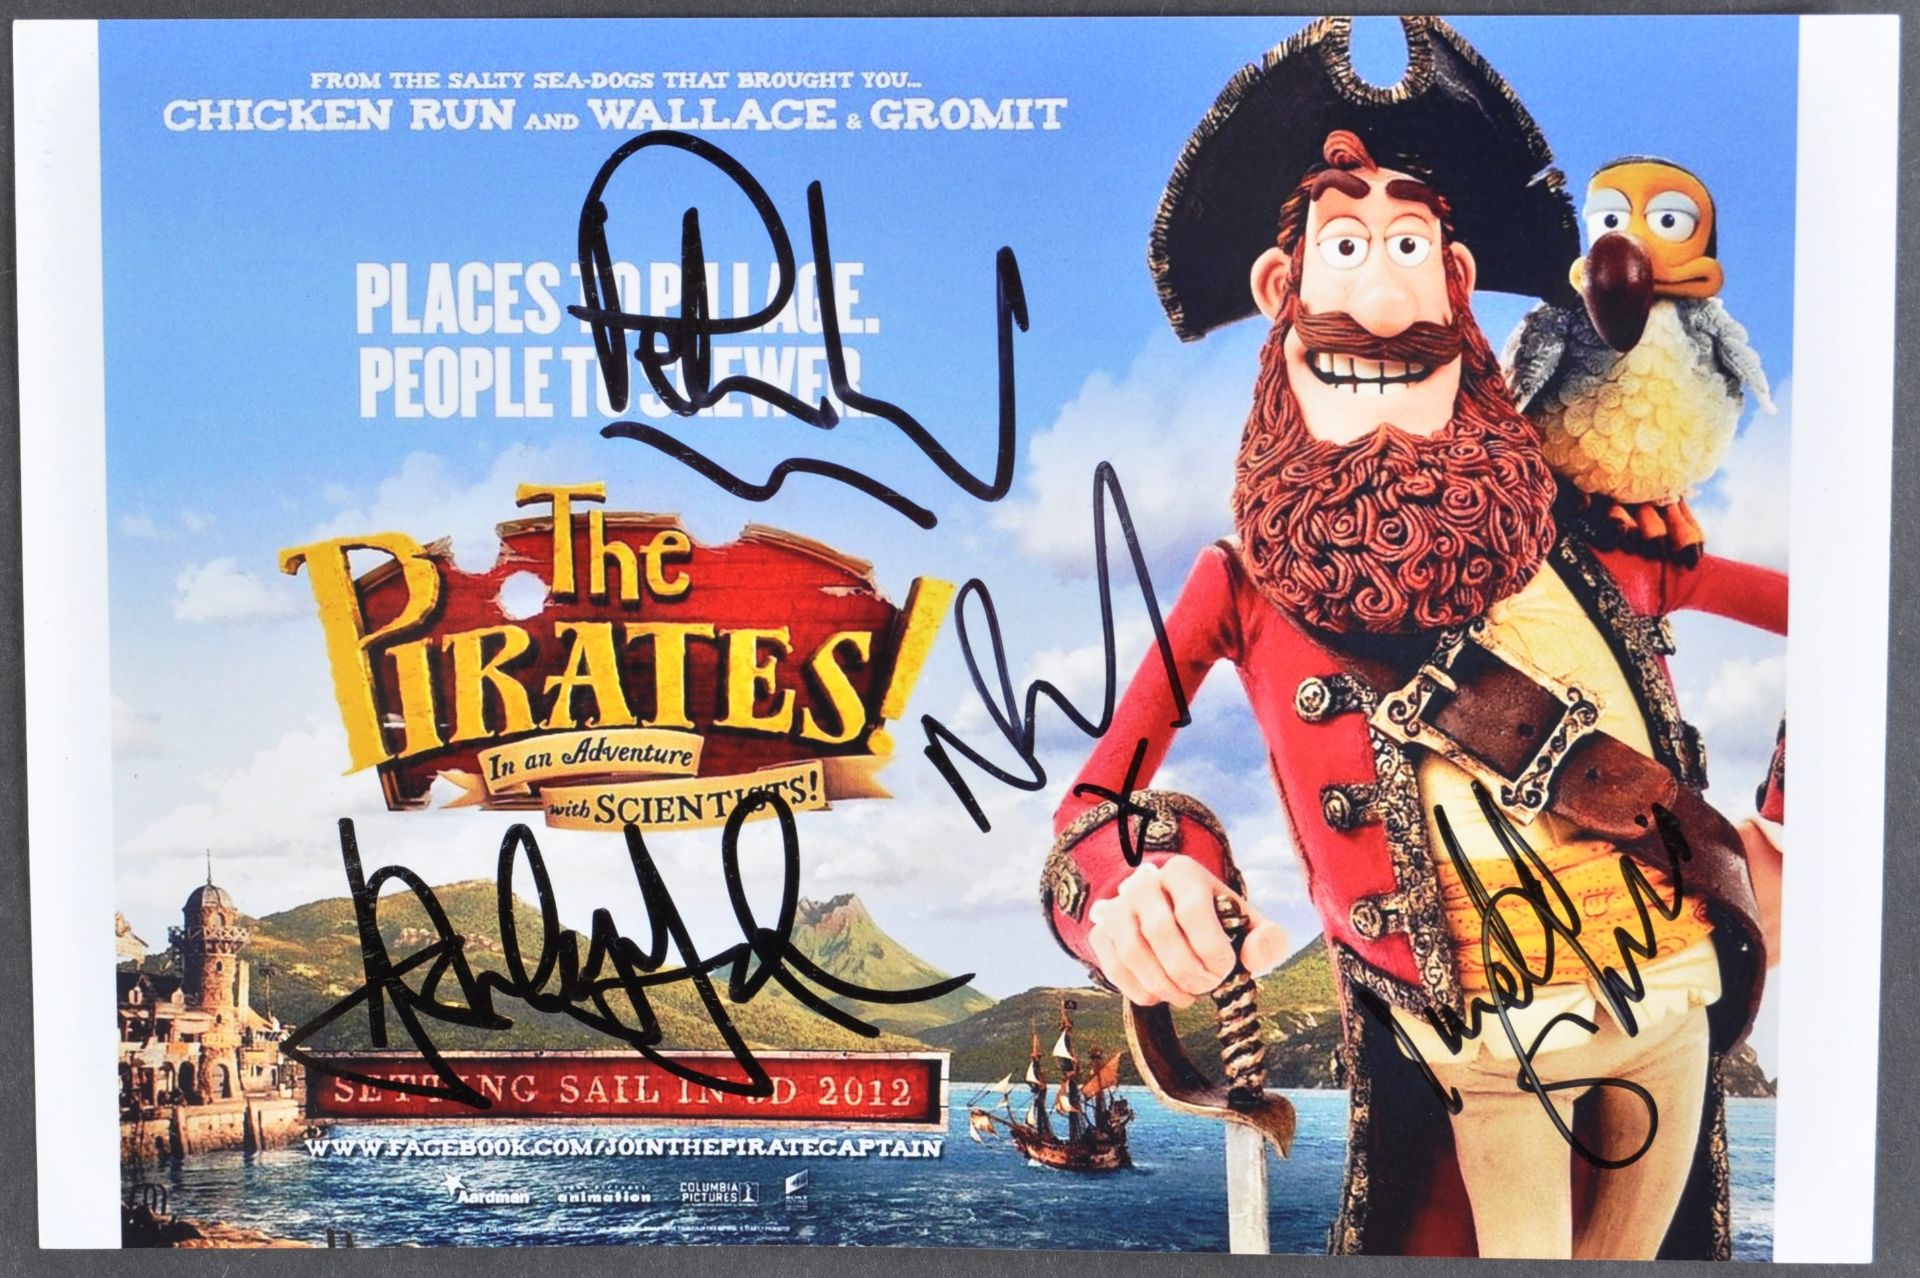 AARDMAN ANIMATIONS - THE PIRATES (2012) - CAST SIGNED PHOTOGRAPH